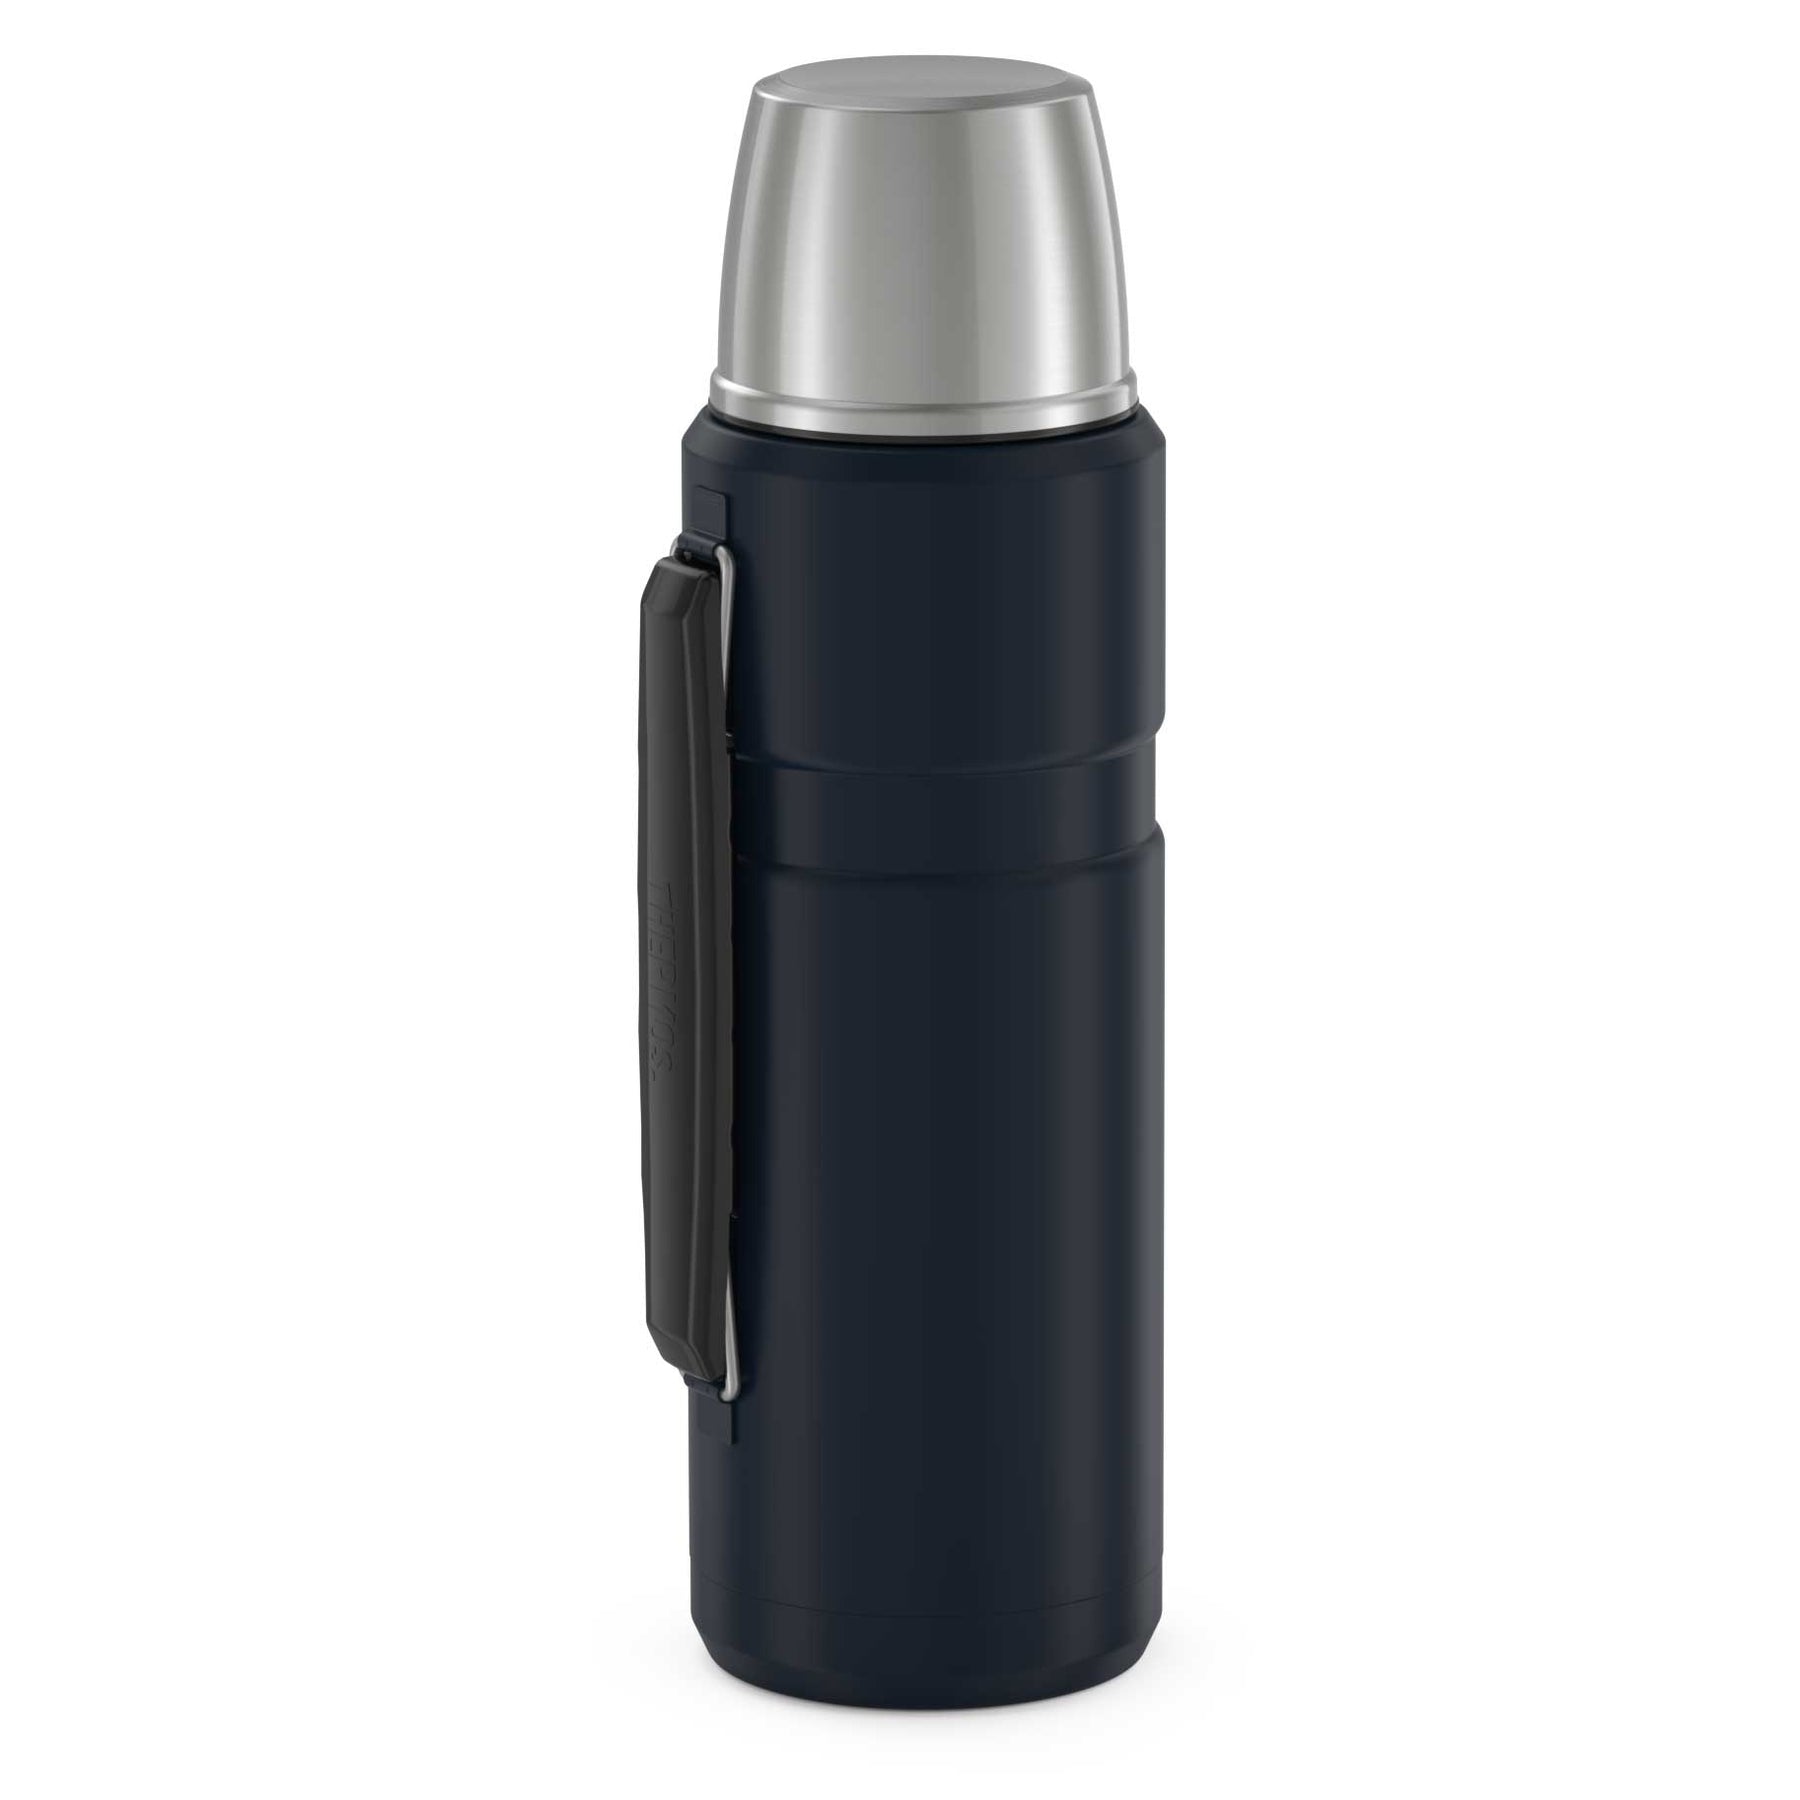 Glass Thermos vs Stainless Steel